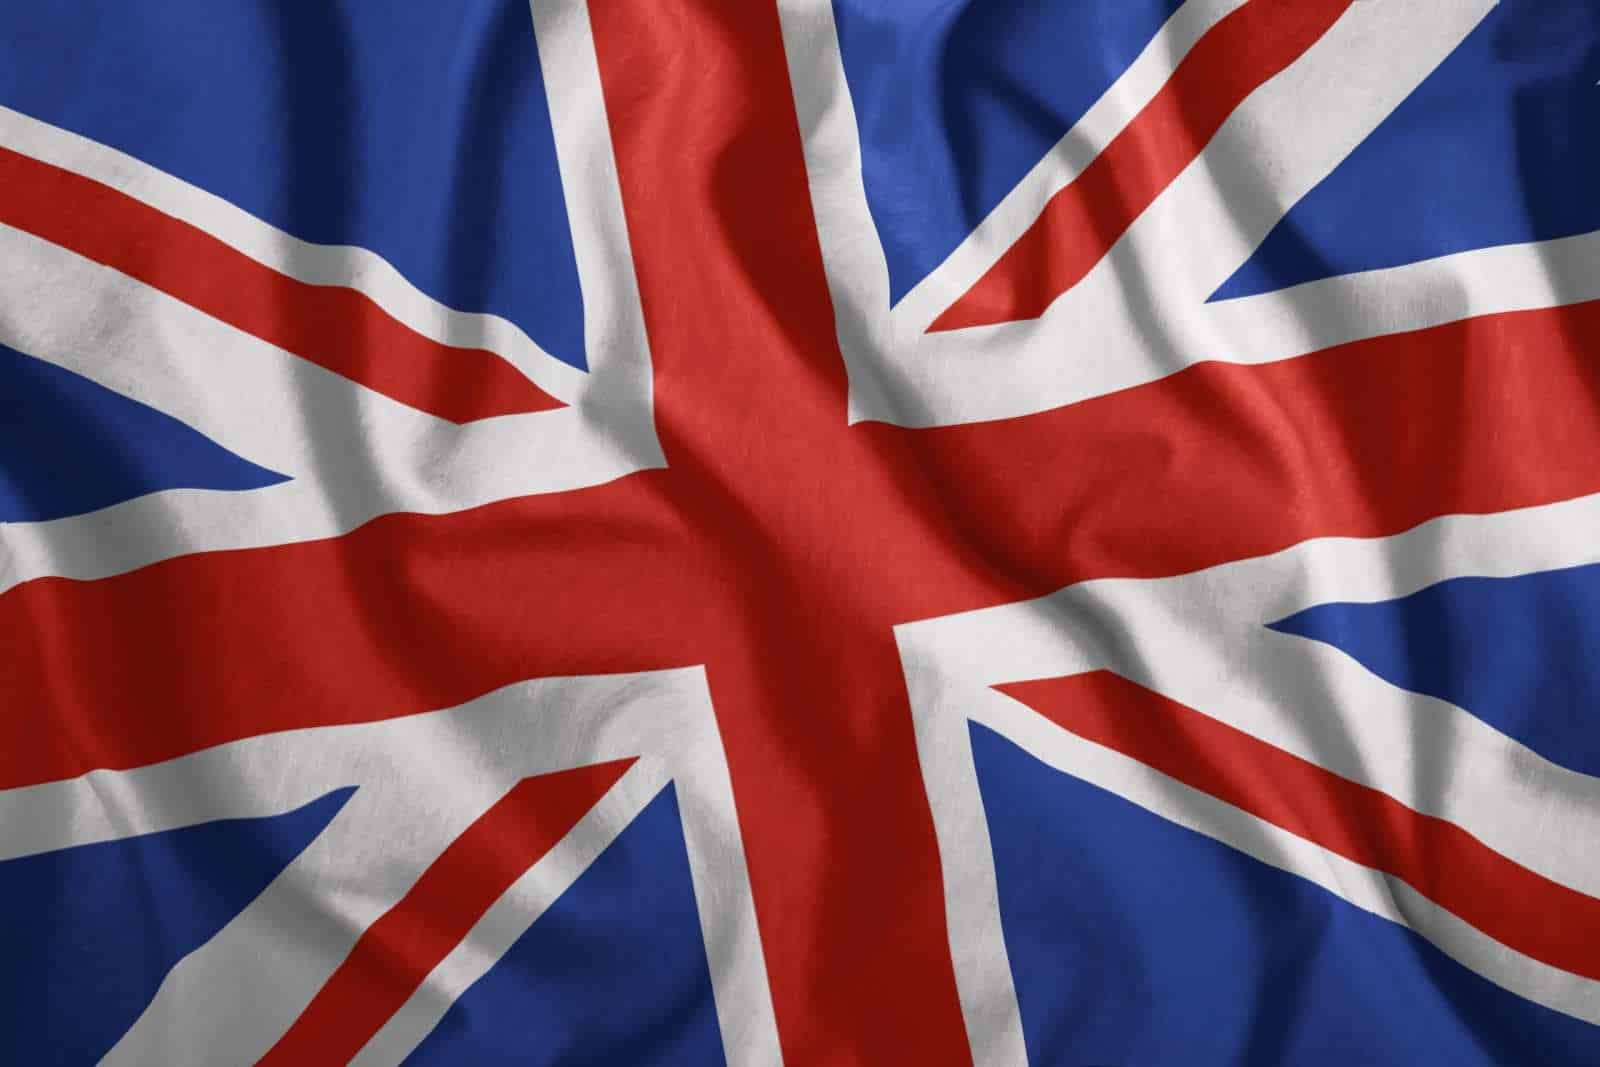 The flag of Great Britain